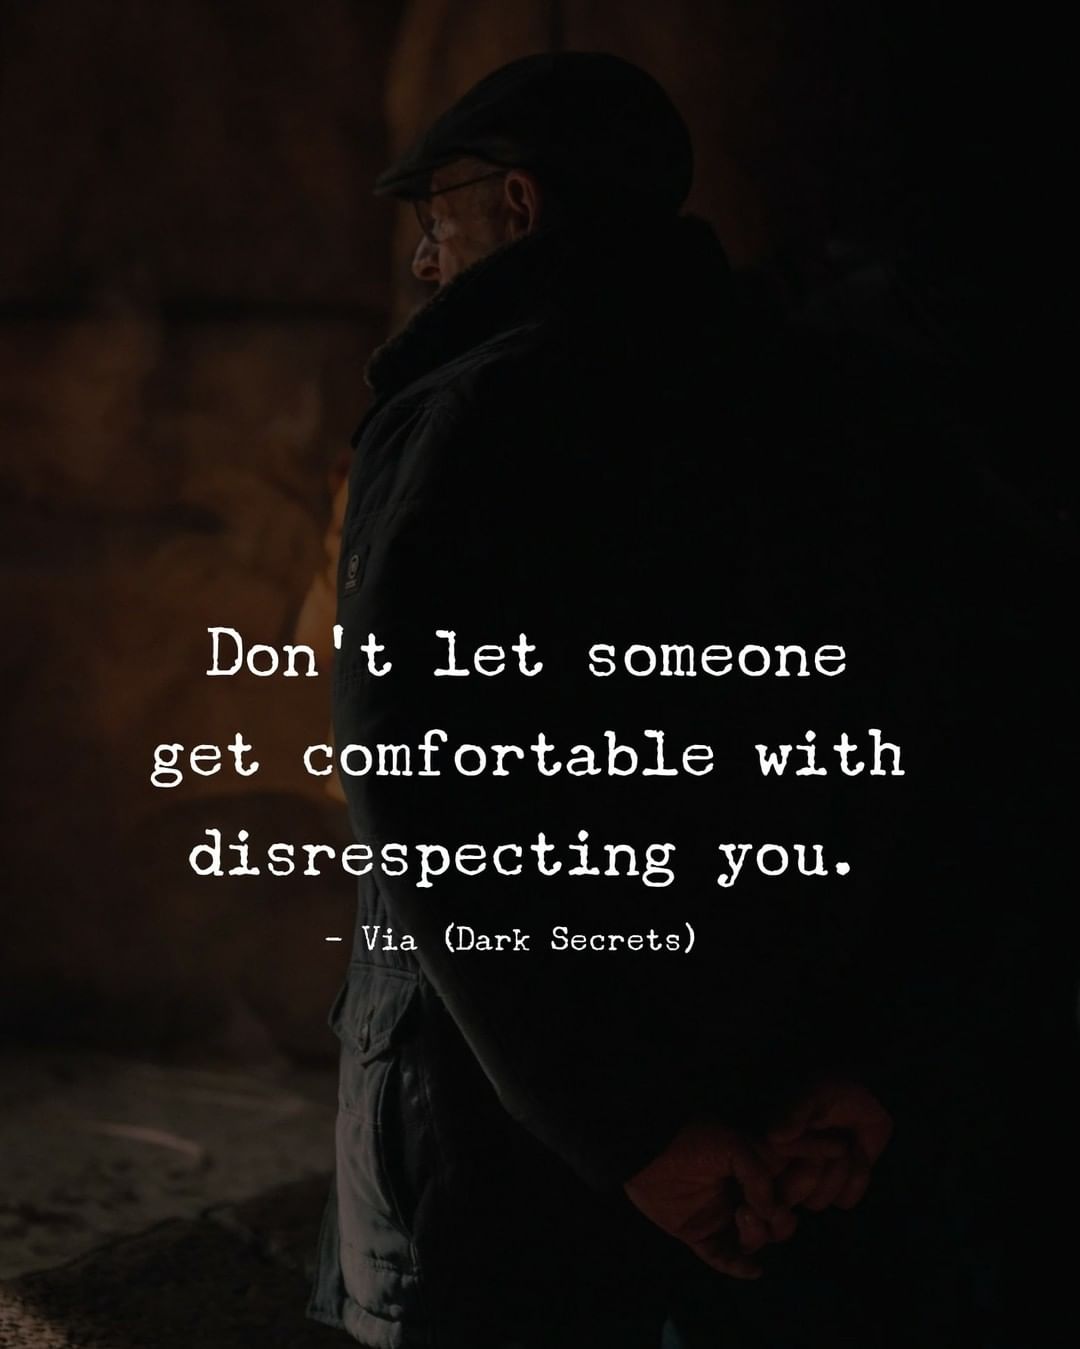 Don't let someone get comfortable with disrespecting you.